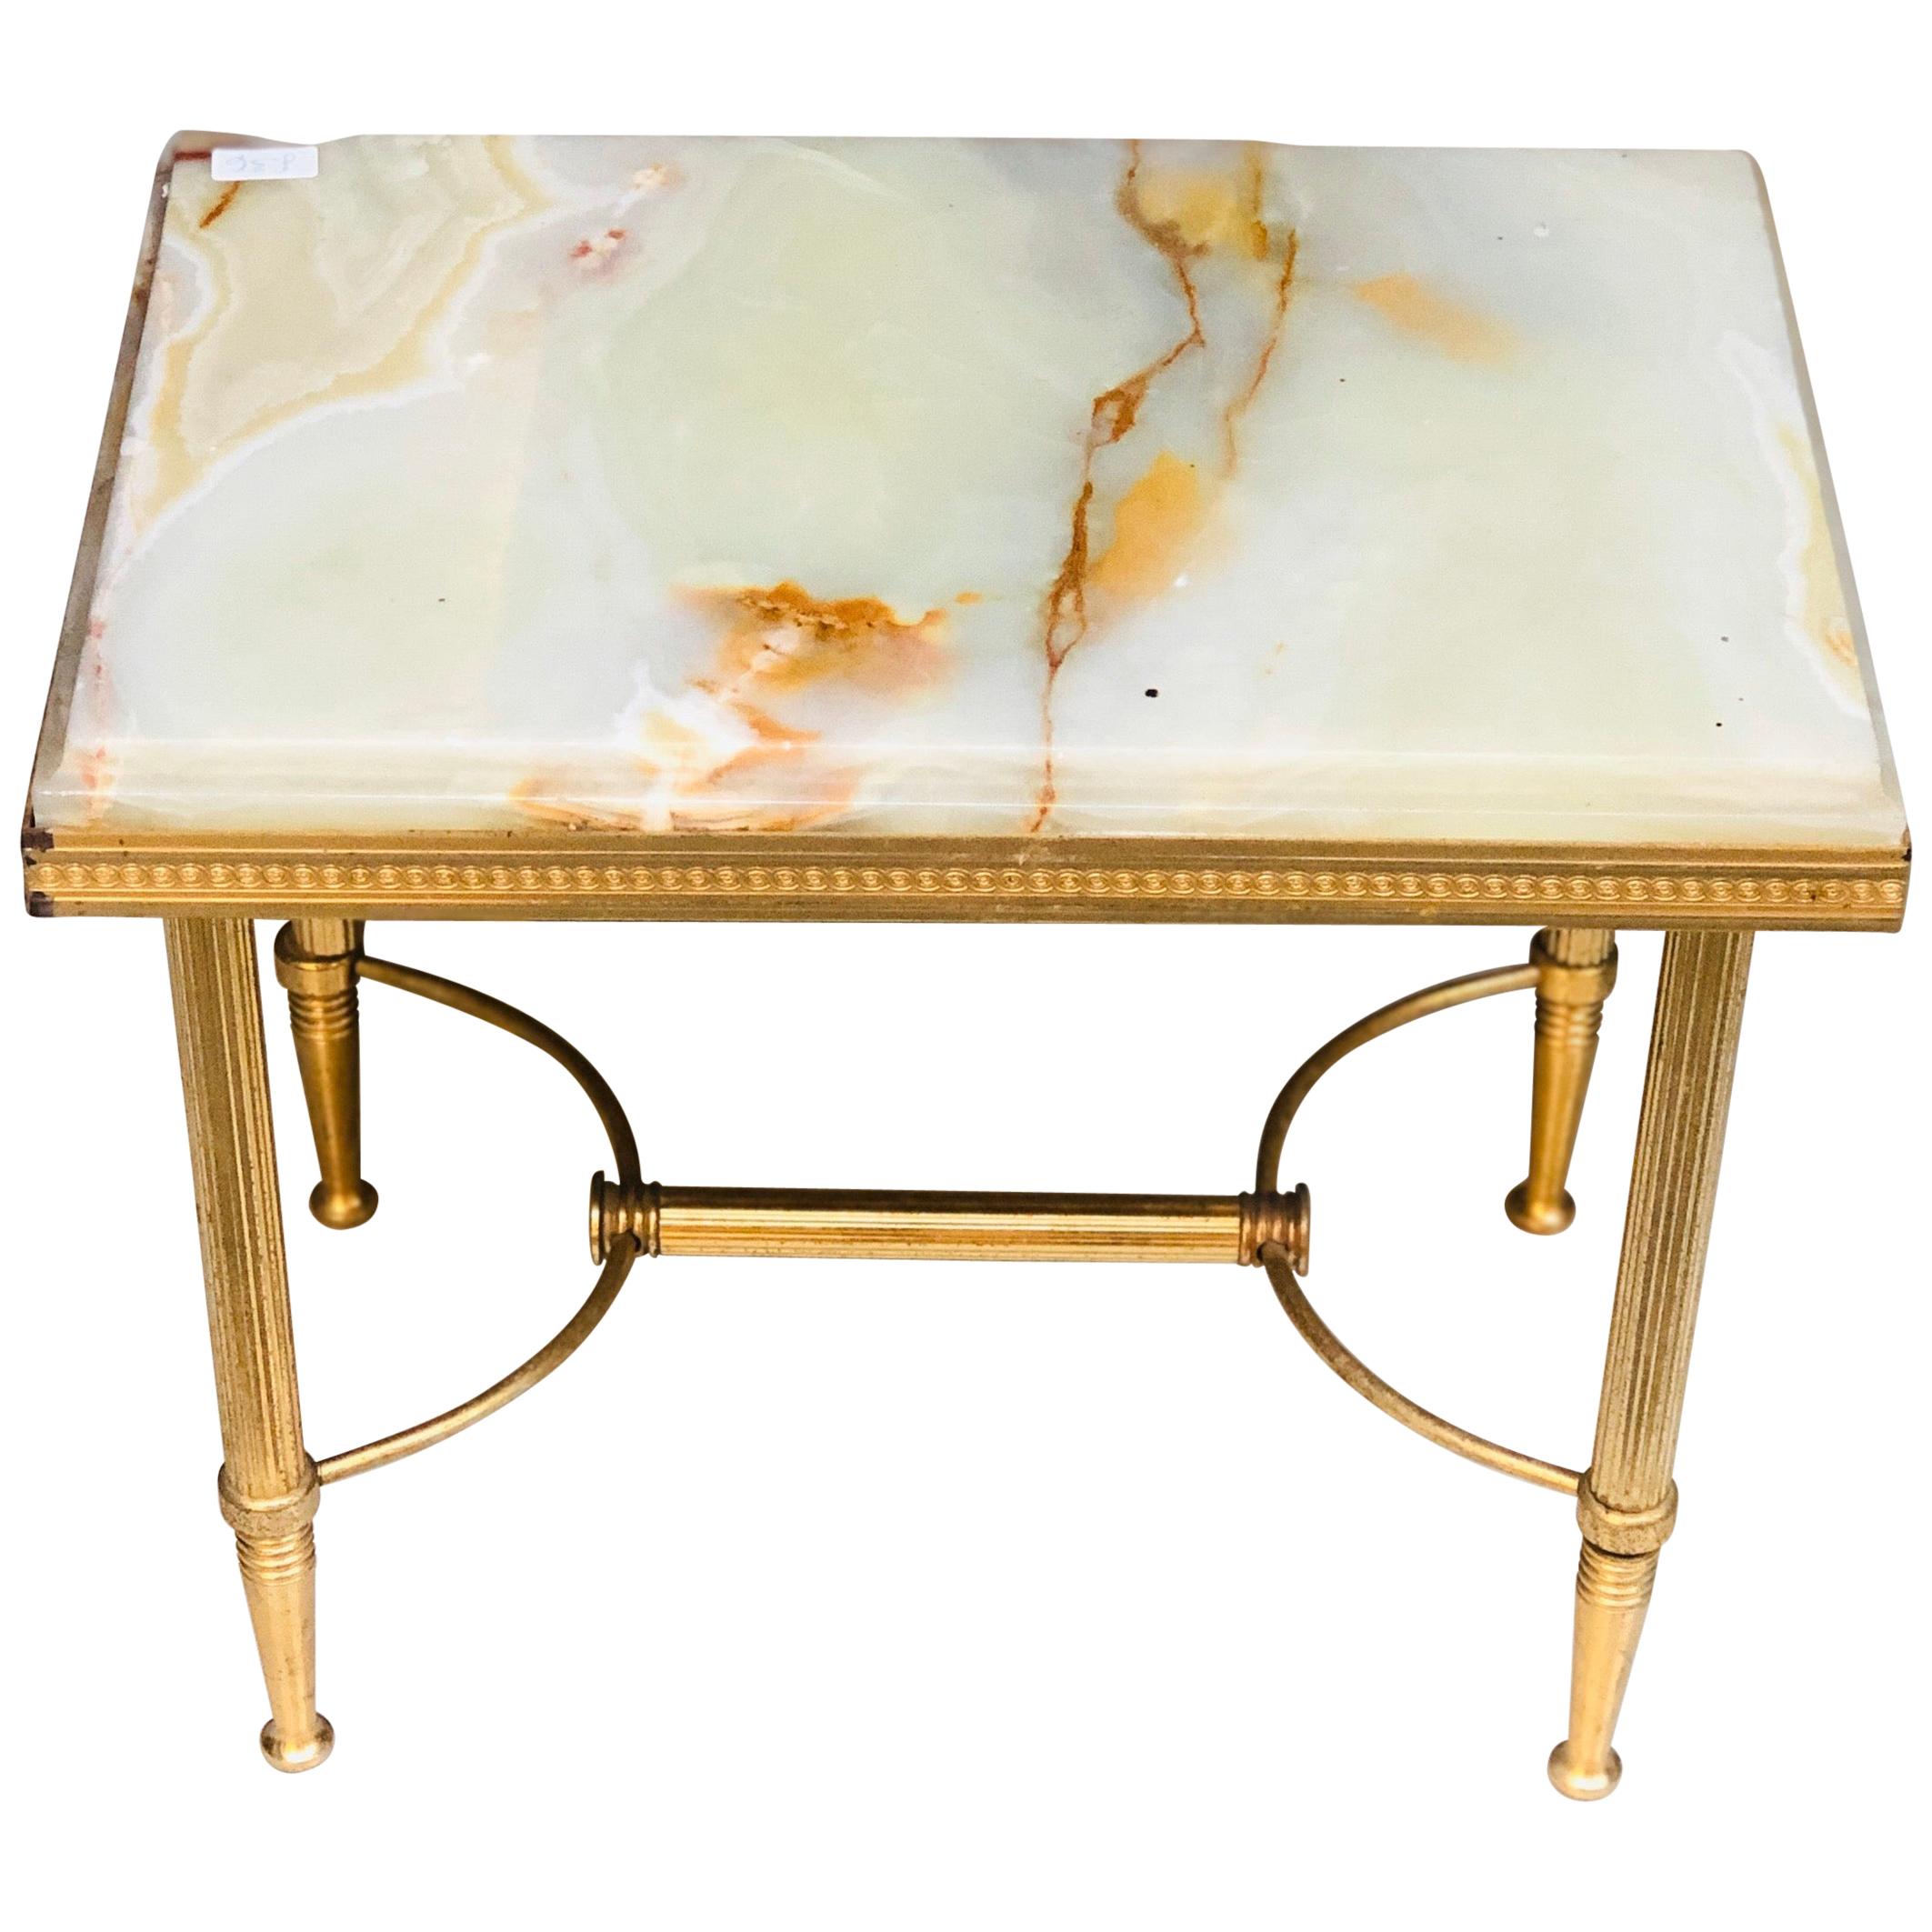 20th Century French Small Marble Top Tray Table Standing on Brass Crossed Legs For Sale